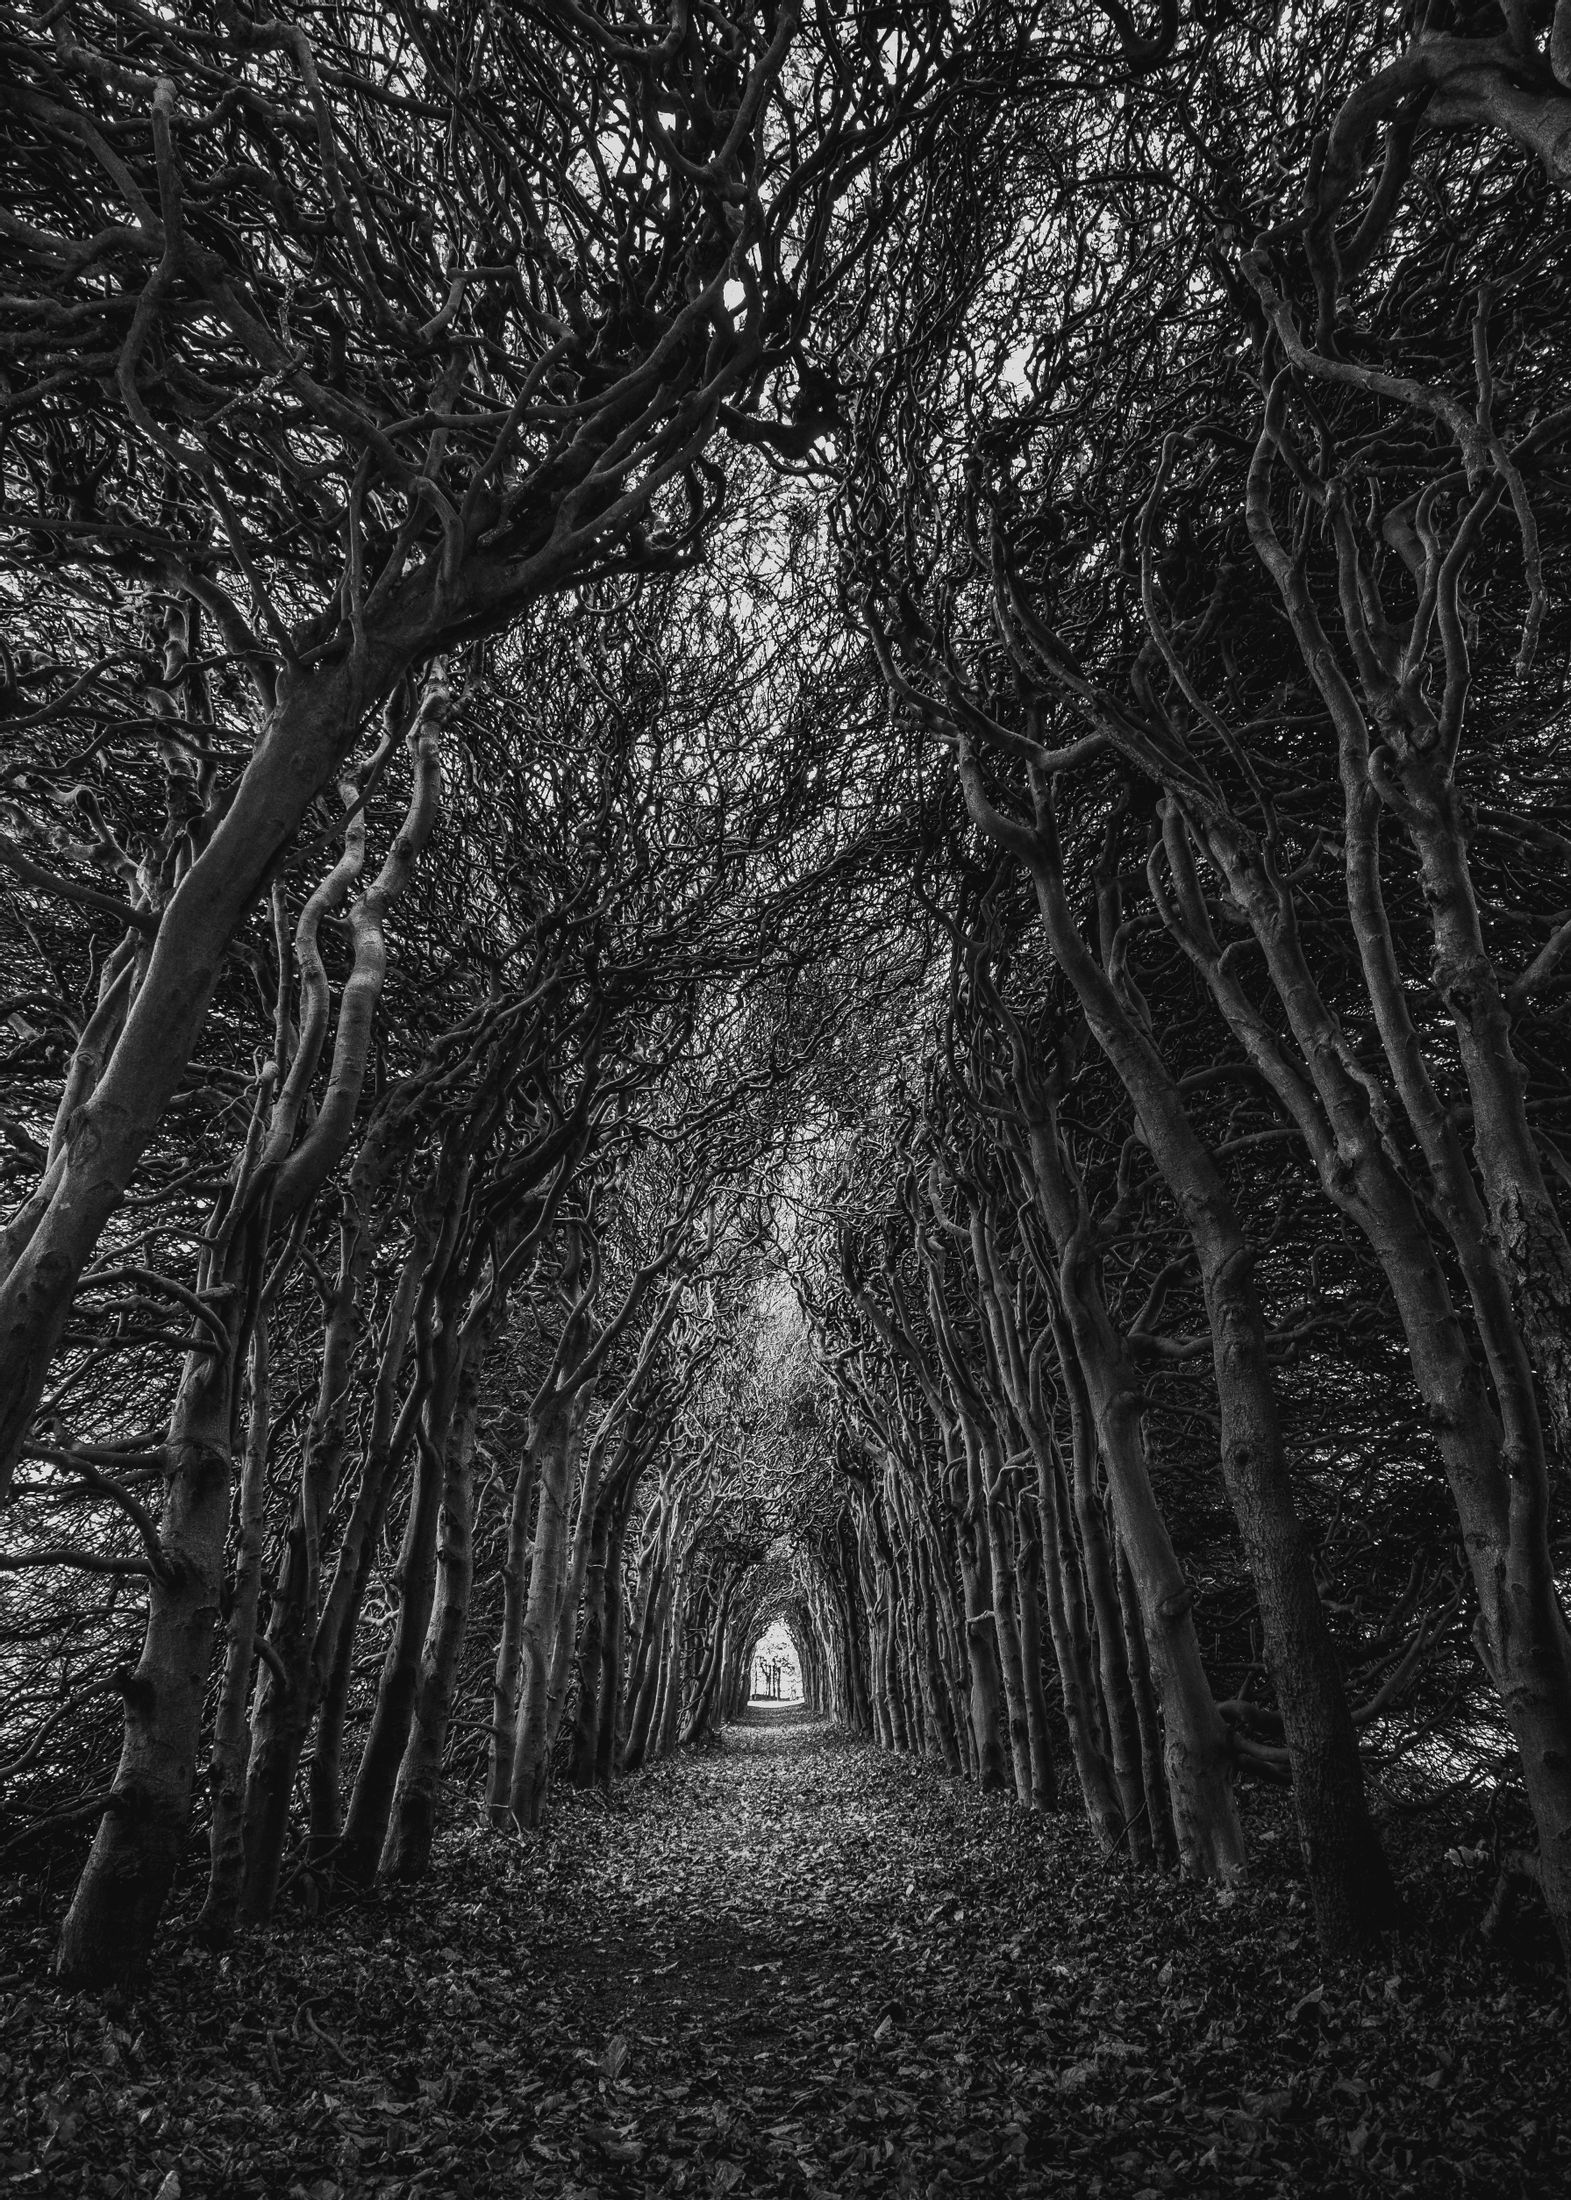 Download mobile wallpaper: Bw, Arch, Swirling, Involute, Trees